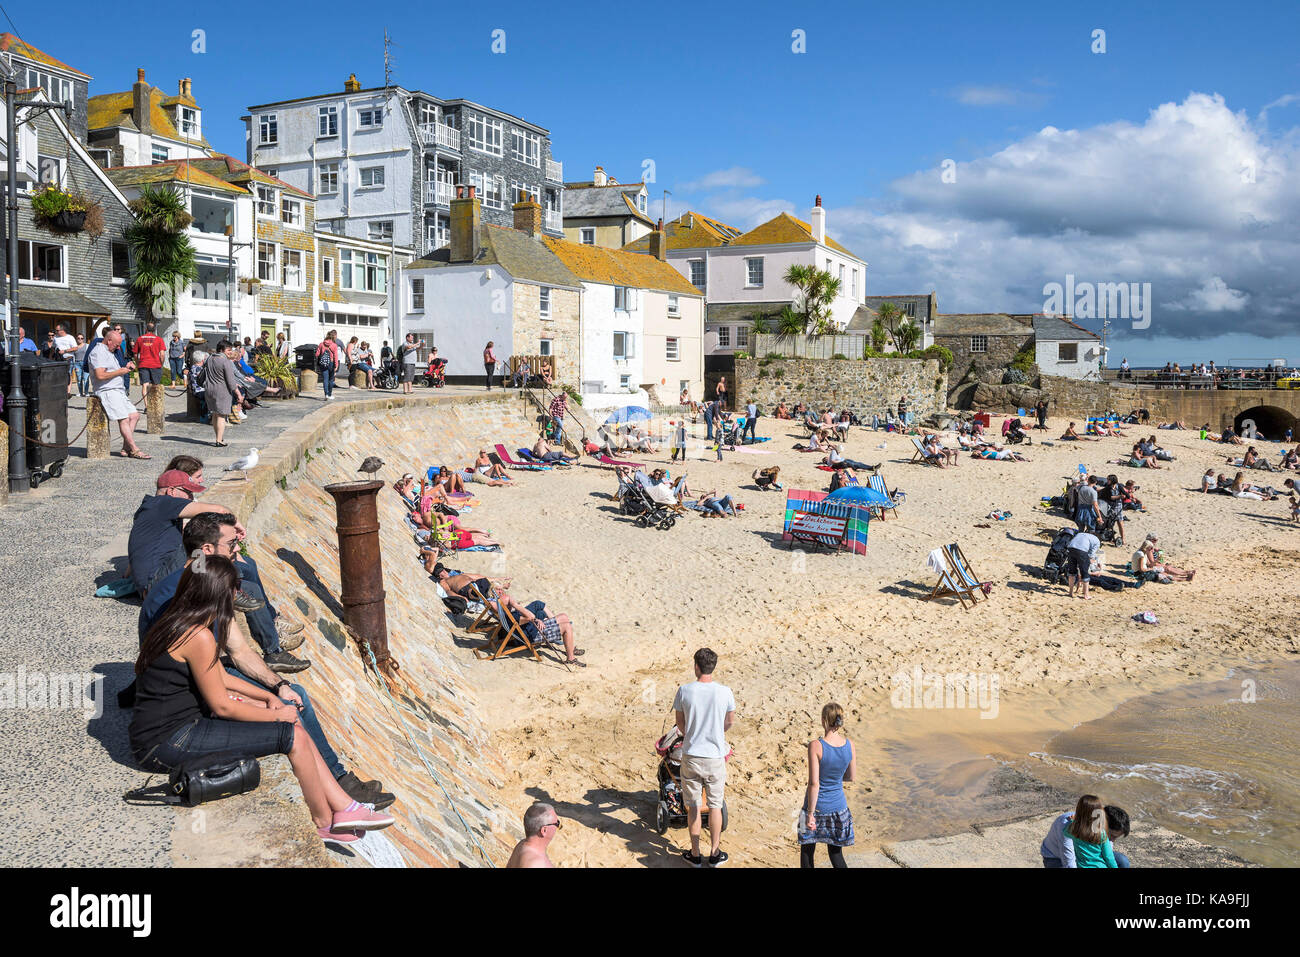 St ives - vacanzieri relax su St ives Harbour Beach di St Ives in Cornovaglia. Foto Stock